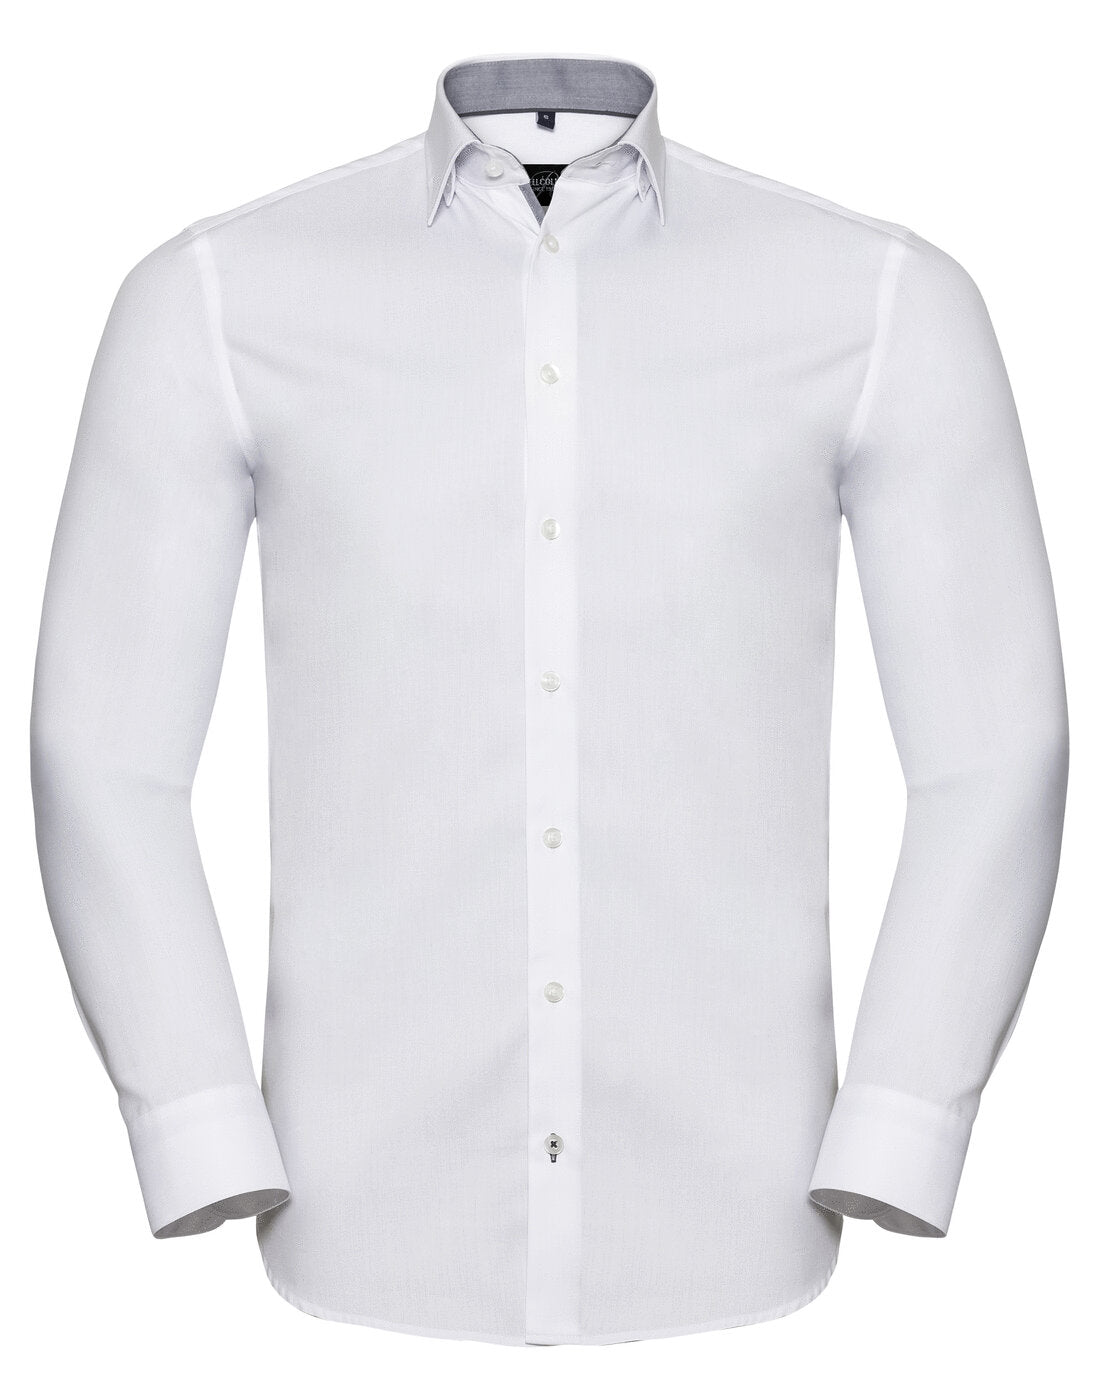 Russell Long Sleeve Tailored Contrast Herringbone Shirt - White/Silver/Convoy Grey